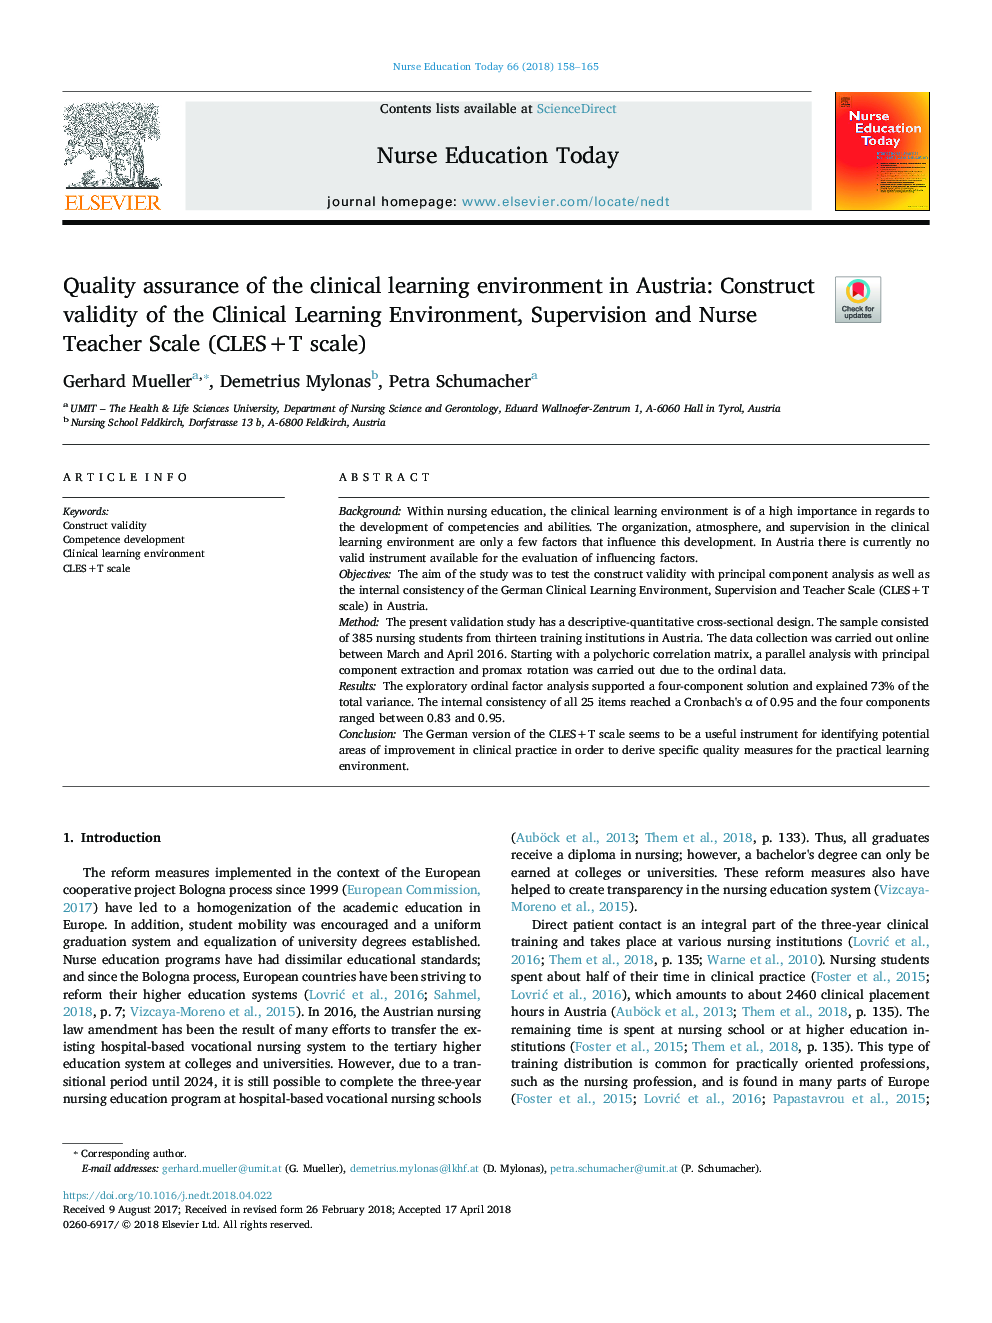 Quality assurance of the clinical learning environment in Austria: Construct validity of the Clinical Learning Environment, Supervision and Nurse Teacher Scale (CLES+T scale)